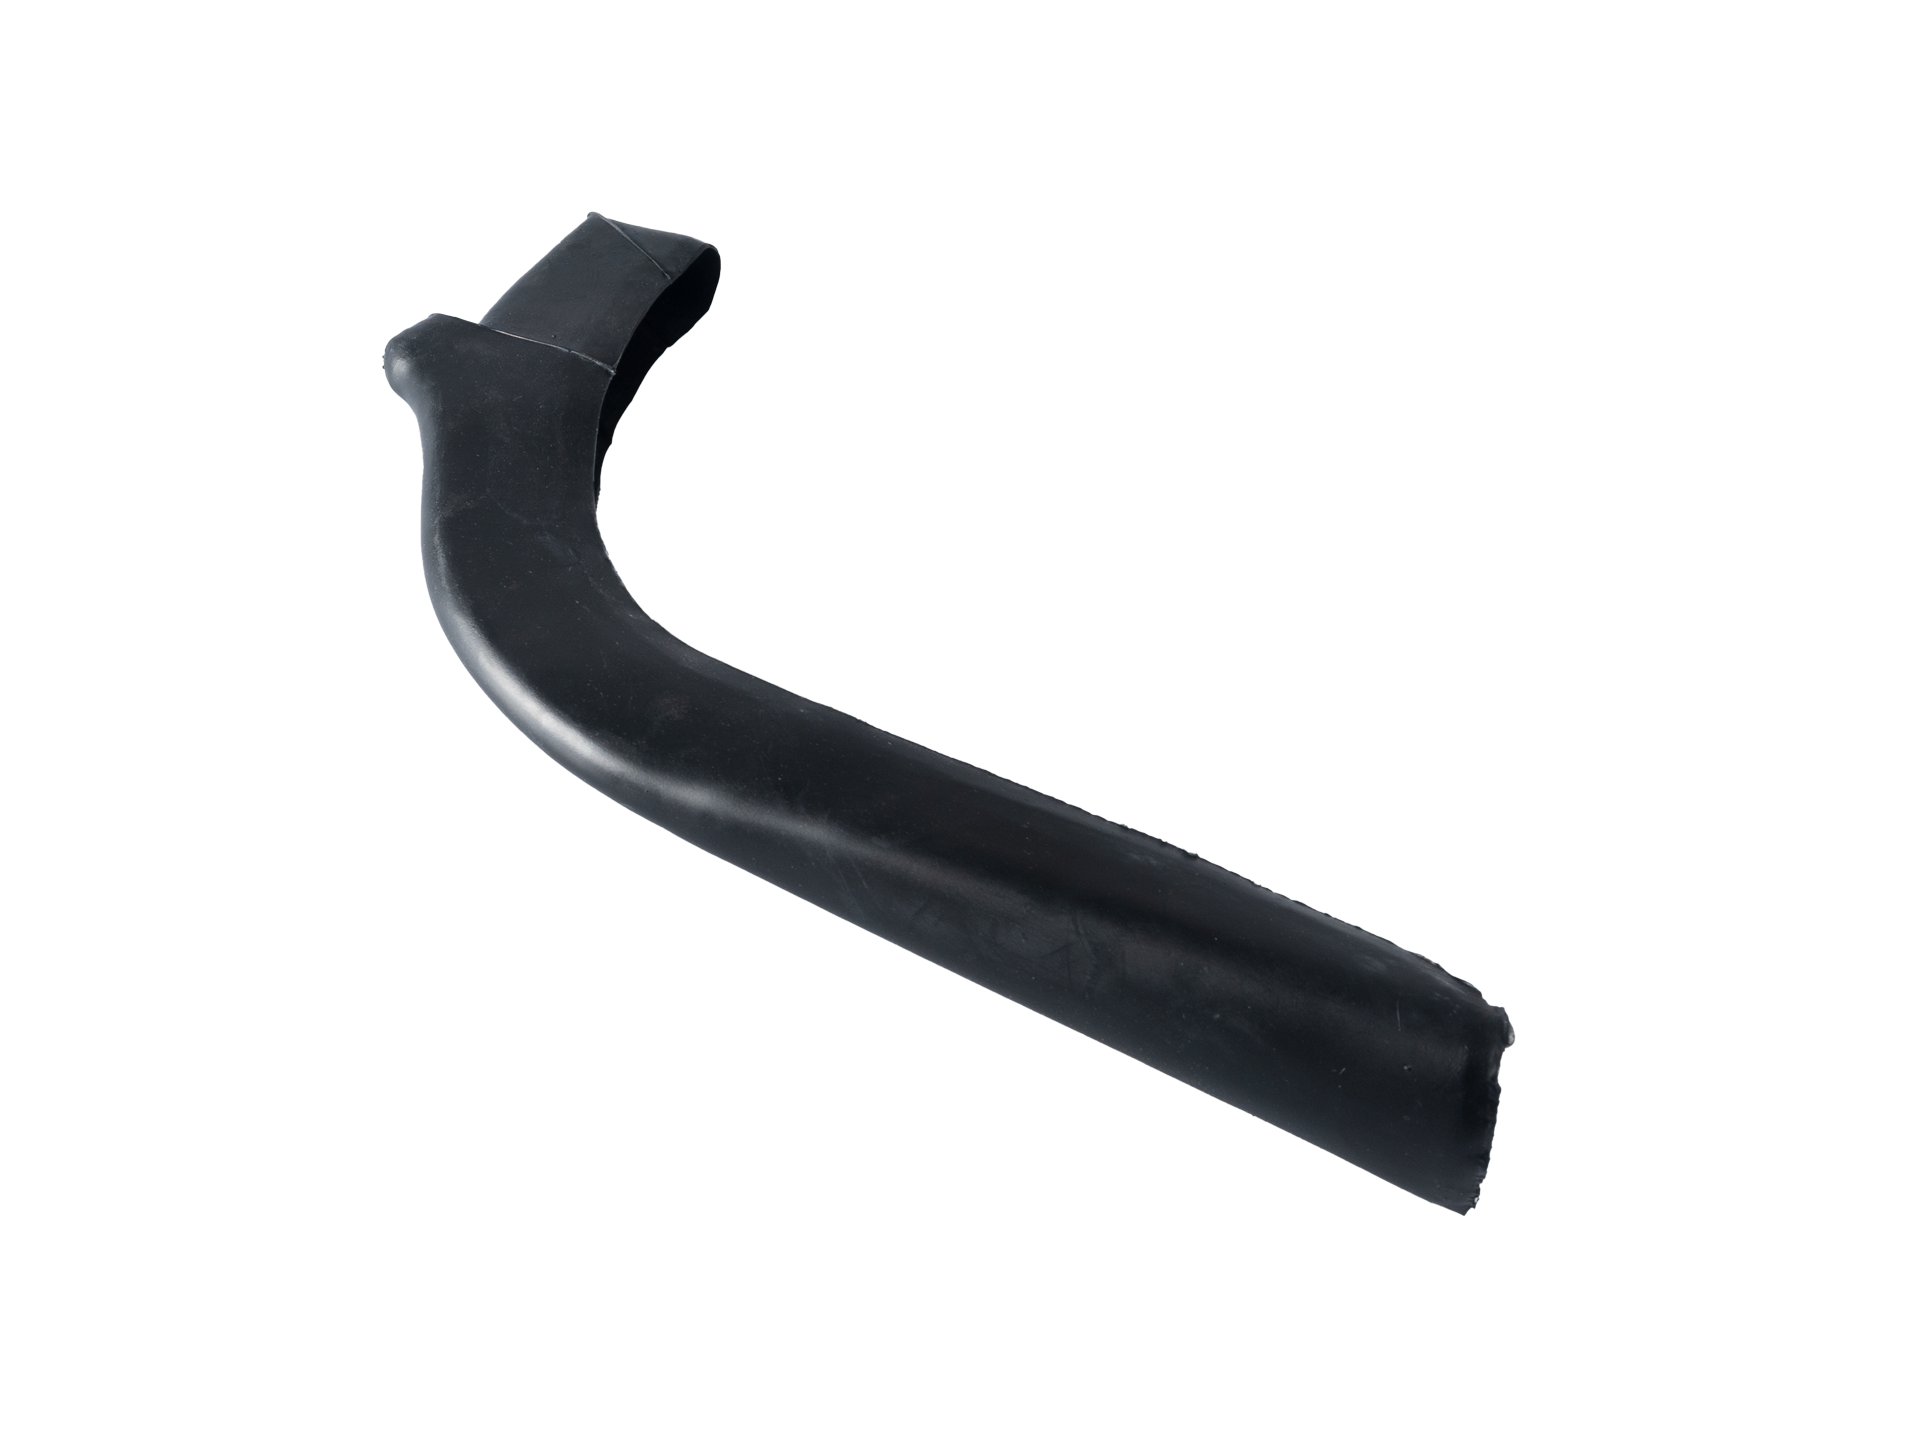 Rubber stem stern - black - Aerius 520, 545 and 585